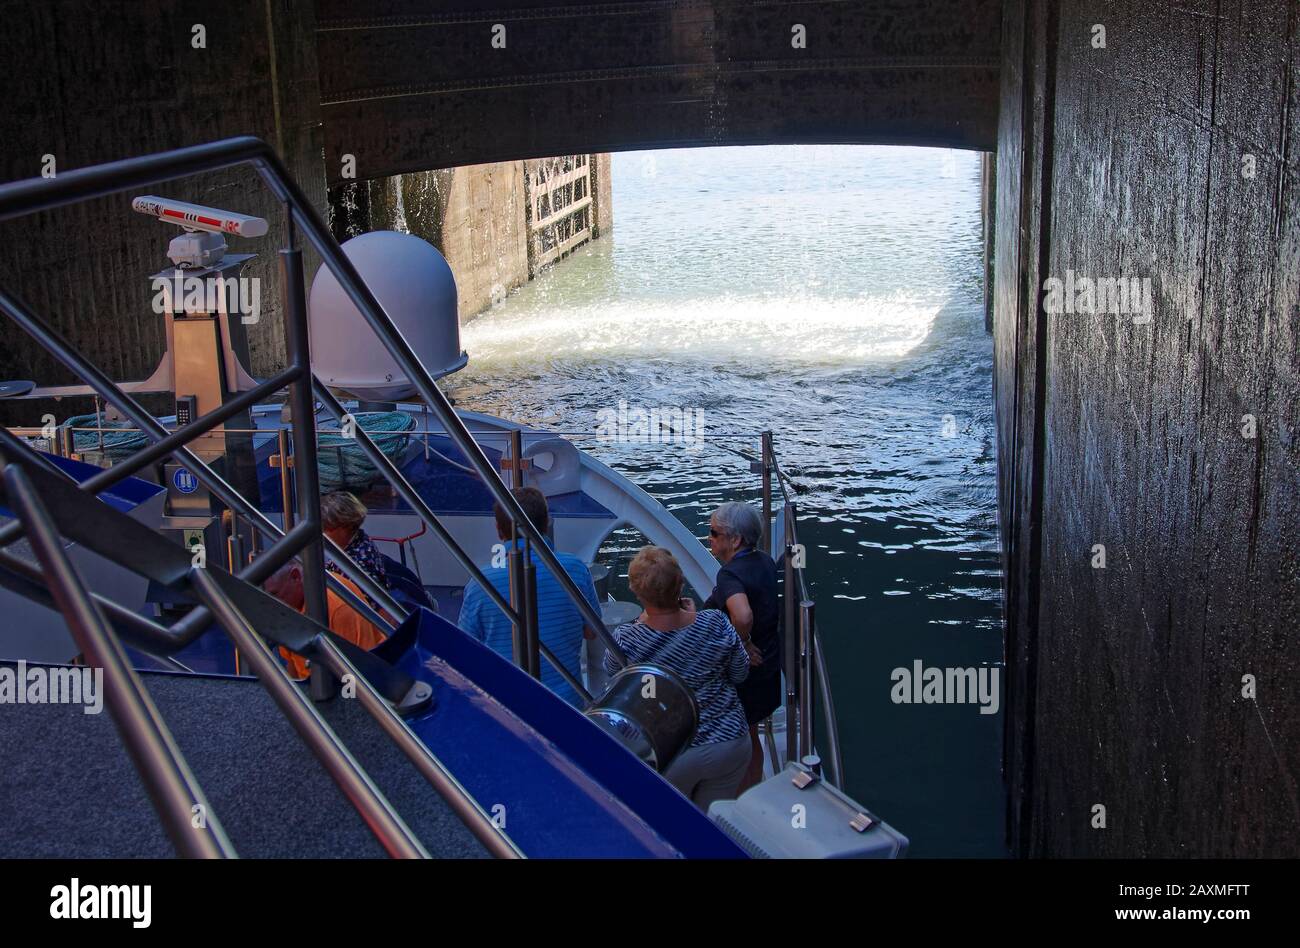 Bollene Lock, door opening, riverboat, people, Rhone River, 71 foot water level difference, navigable, waterway technology, marine, Provence, France, Stock Photo